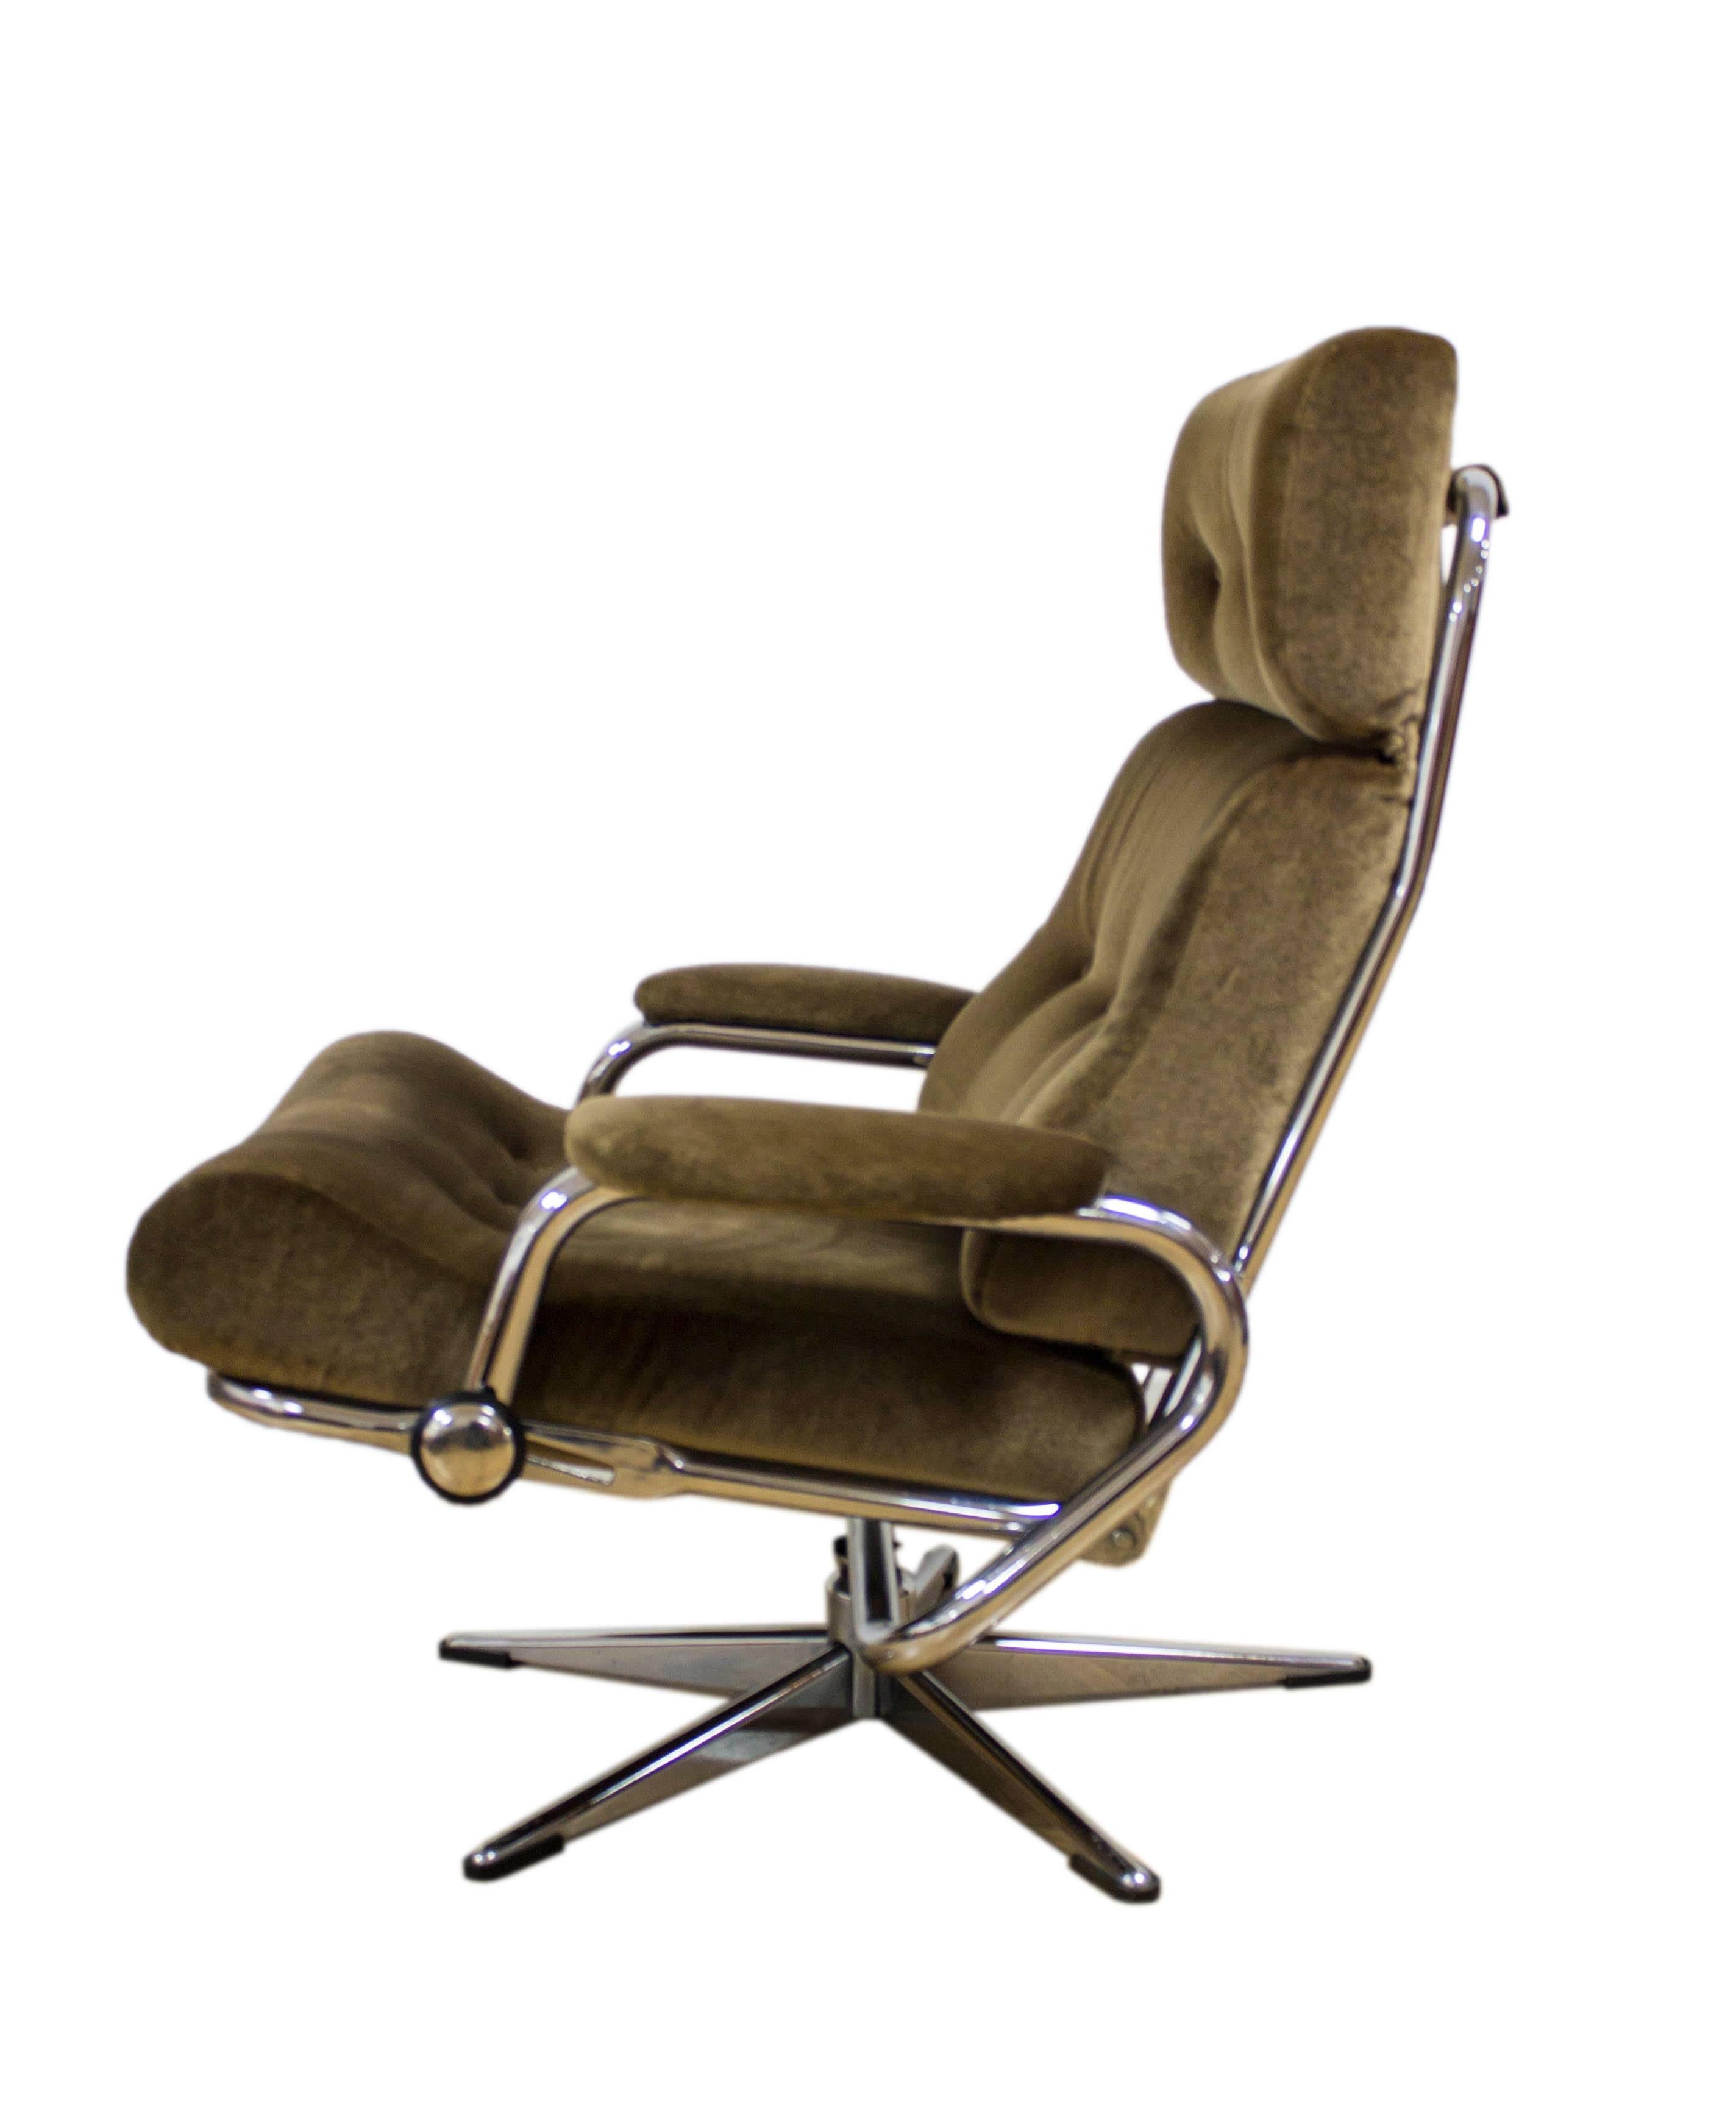 Danish Design Chrome and Fabric Recliner Armchairs Retro G Plan Eames Era In Excellent Condition For Sale In Greater Manchester, GB